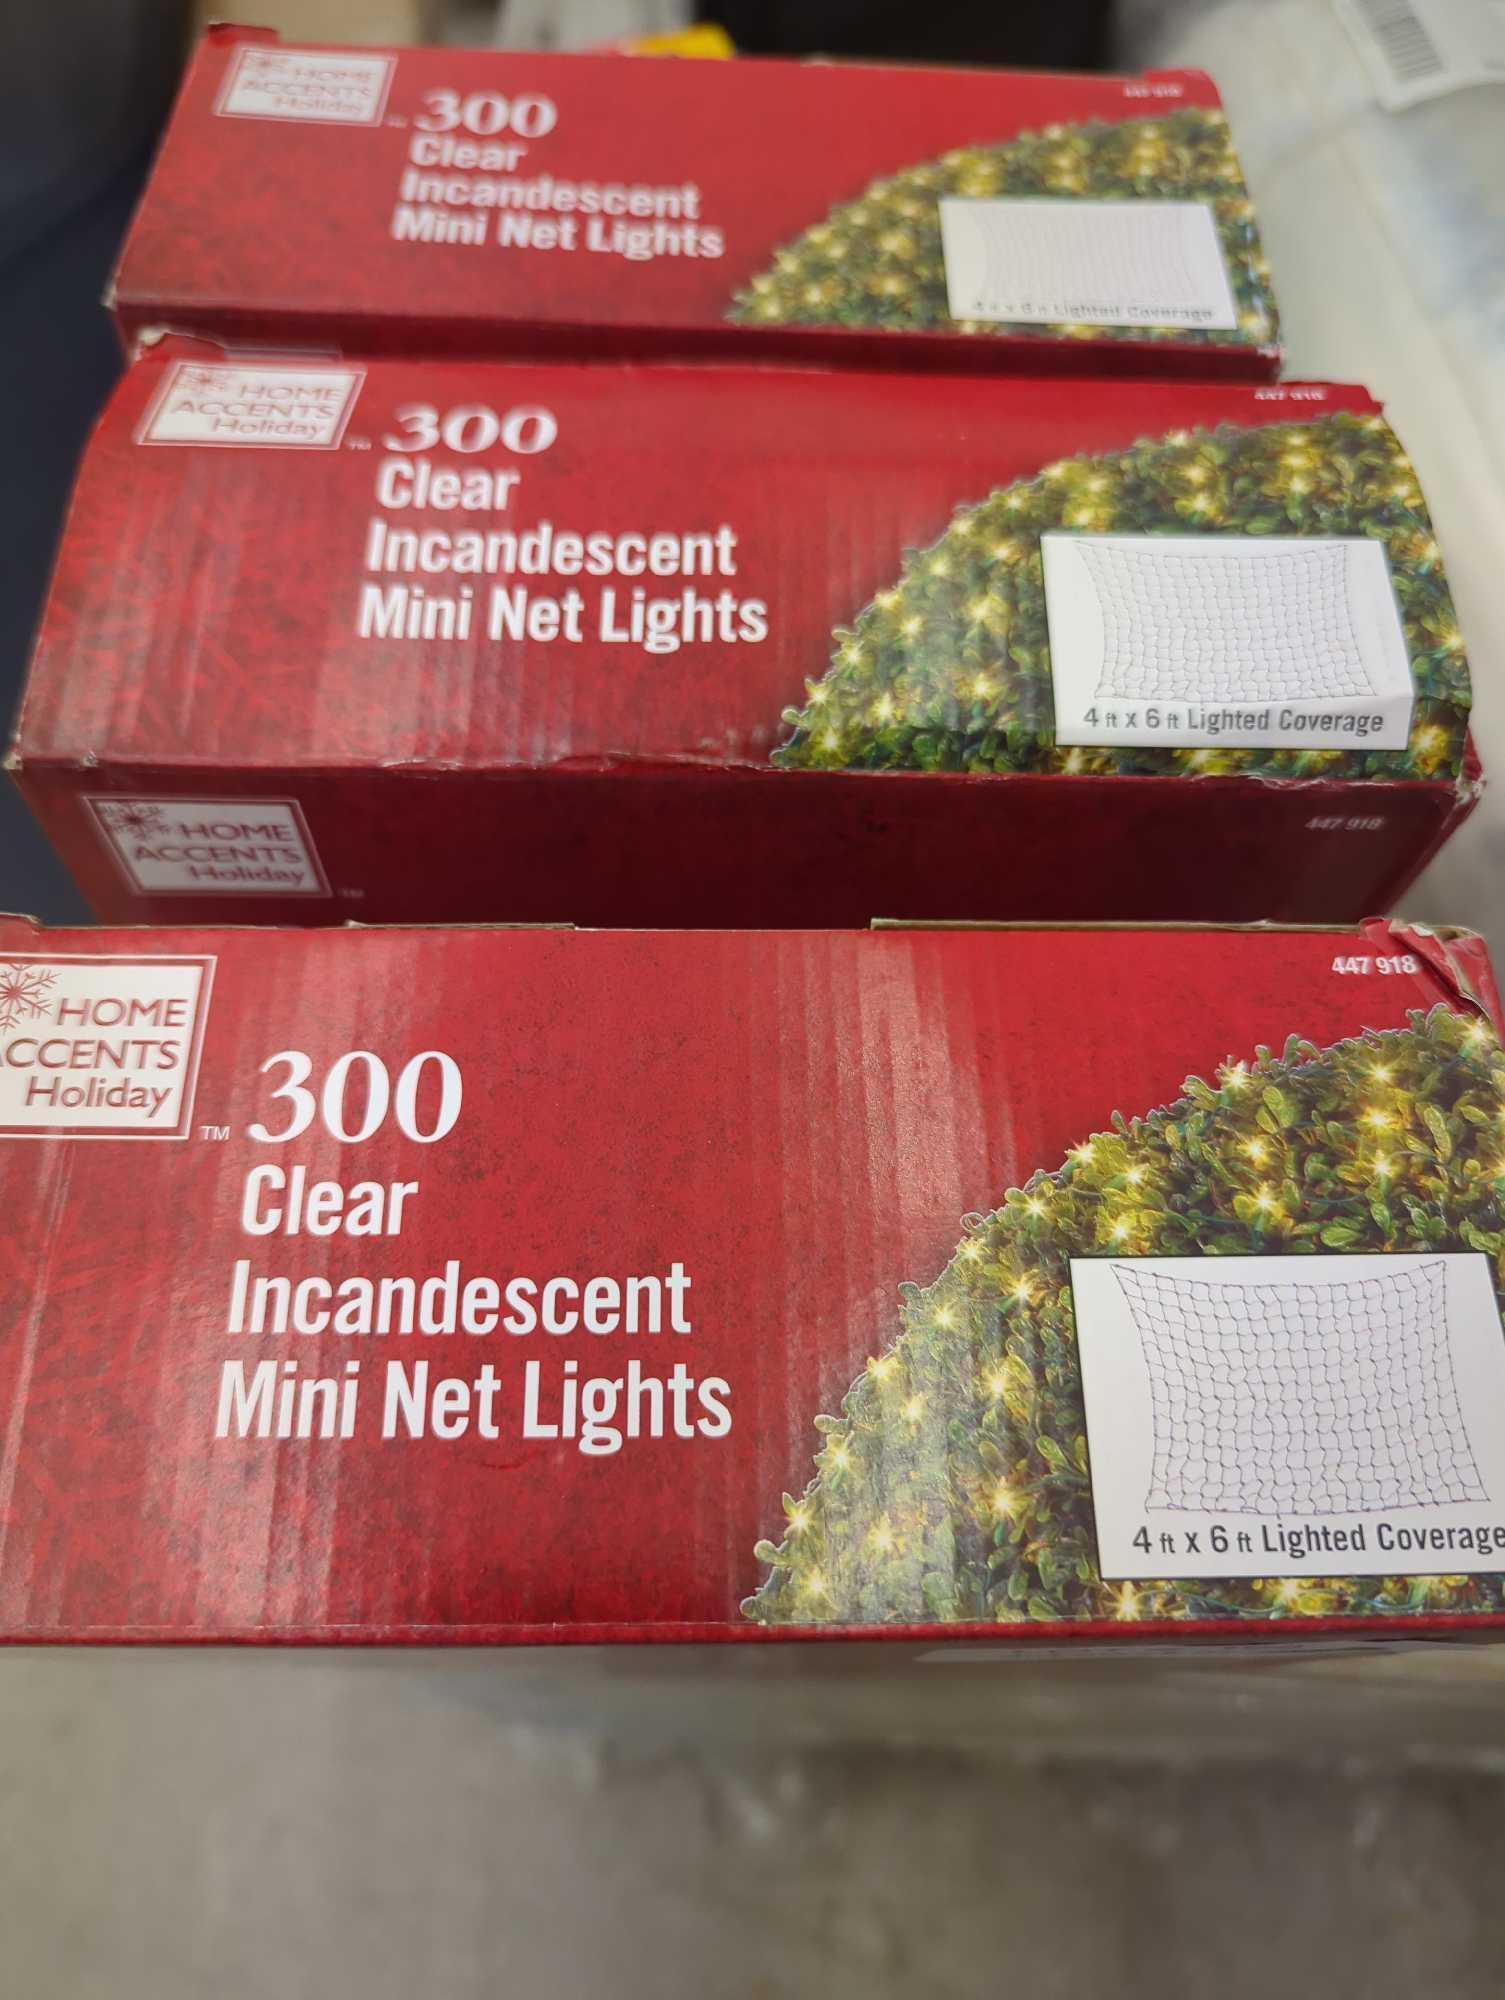 Lot of 3 boxes of Home Accents Holiday 300 Clear Incandescent Mini Net Lights, All Appears to be